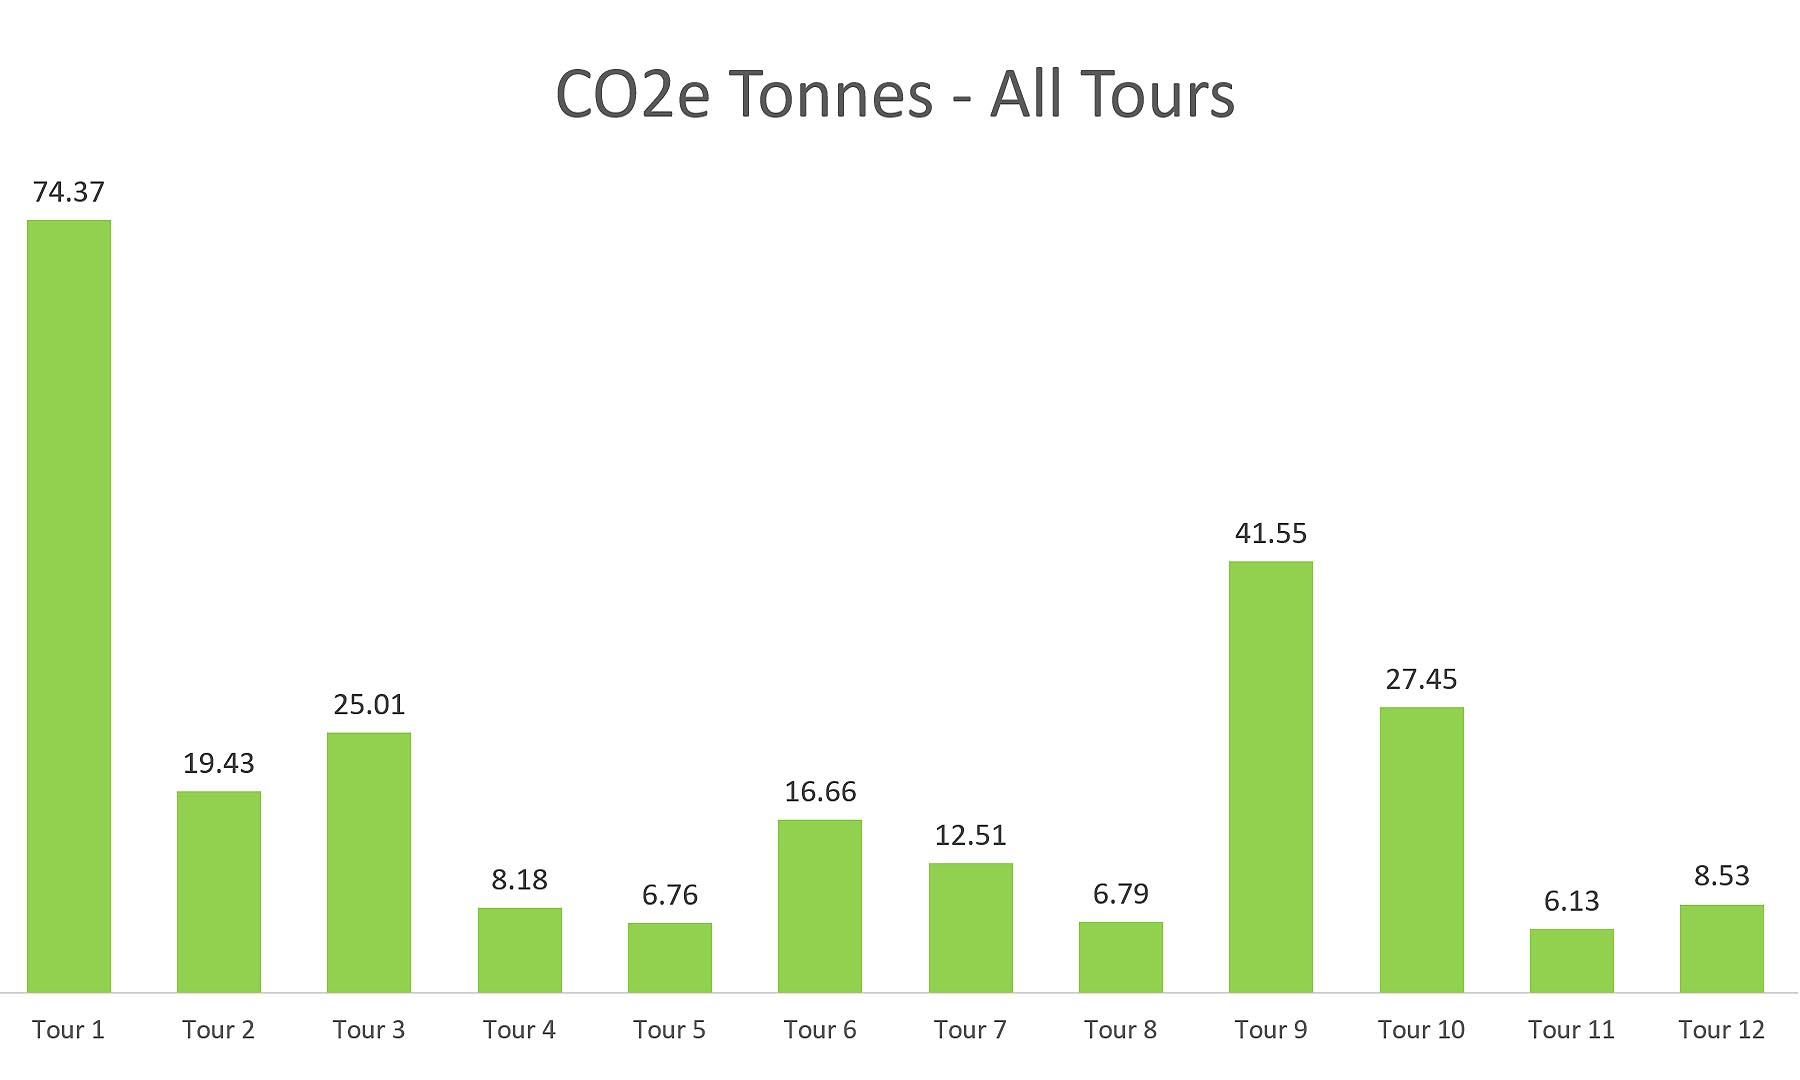 Chart showing the CO2e emissions of 12 tours